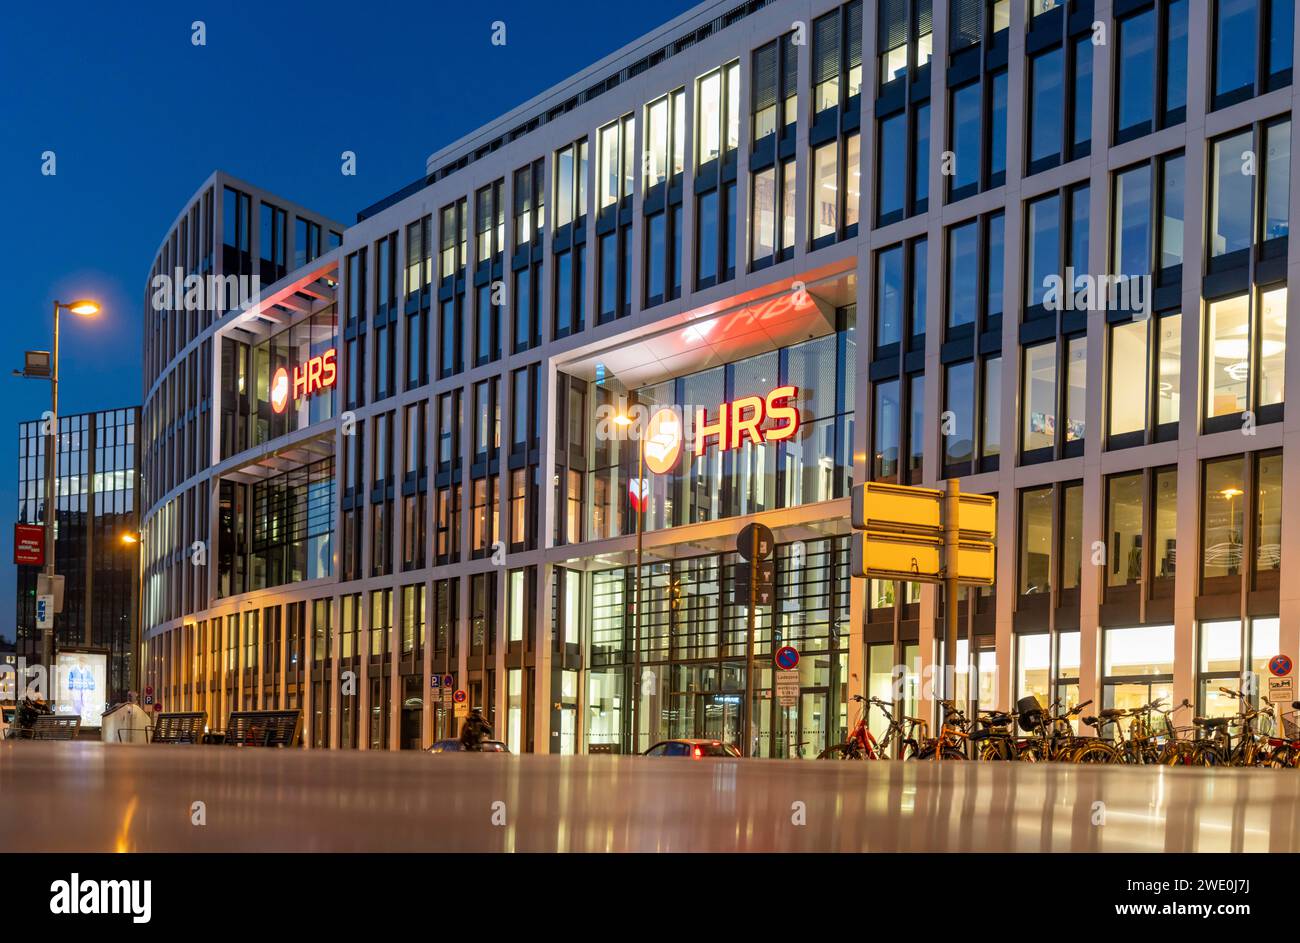 Corporate headquarters of the travel portal HRS, at Cologne Central Station, Breslauer Platz, Cologne Cathedral, Cologne, NRW, Germany, Stock Photo